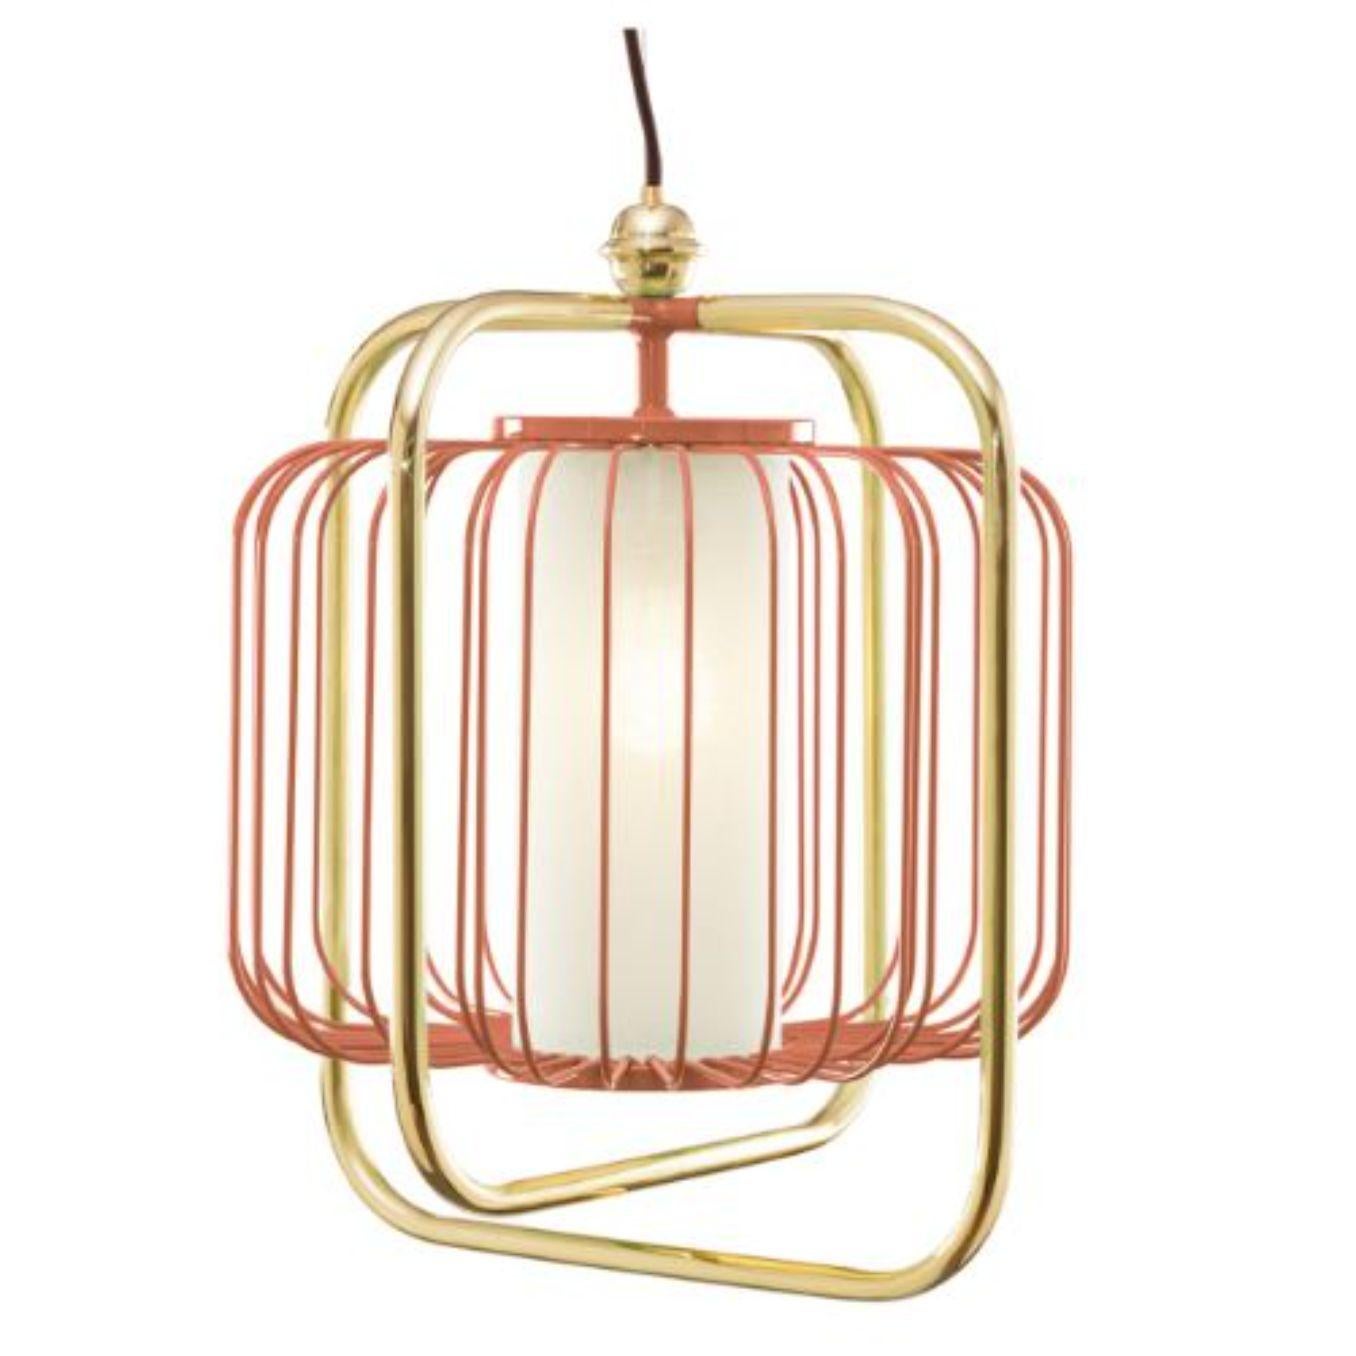 Brass and lipstick Jules III suspension lamp by Dooq
Dimensions: W 38 x D 38 x H 44 cm
Materials: lacquered metal, polished or brushed metal, brass.
abat-jour: cotton
Also available in different colours and